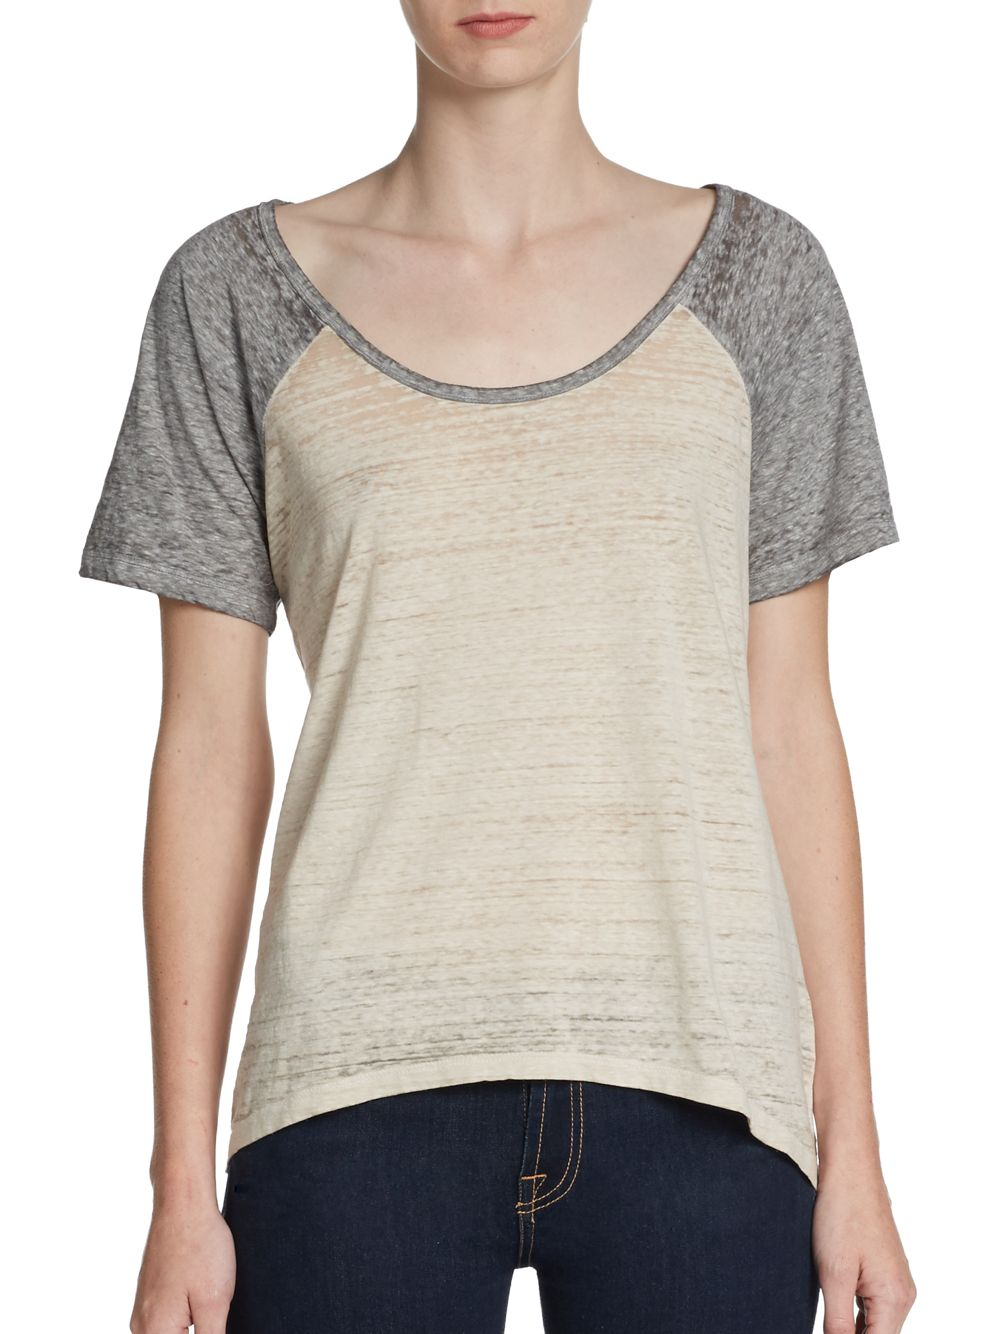 Threads for Thought Colette Slub-knit Tee in Natural